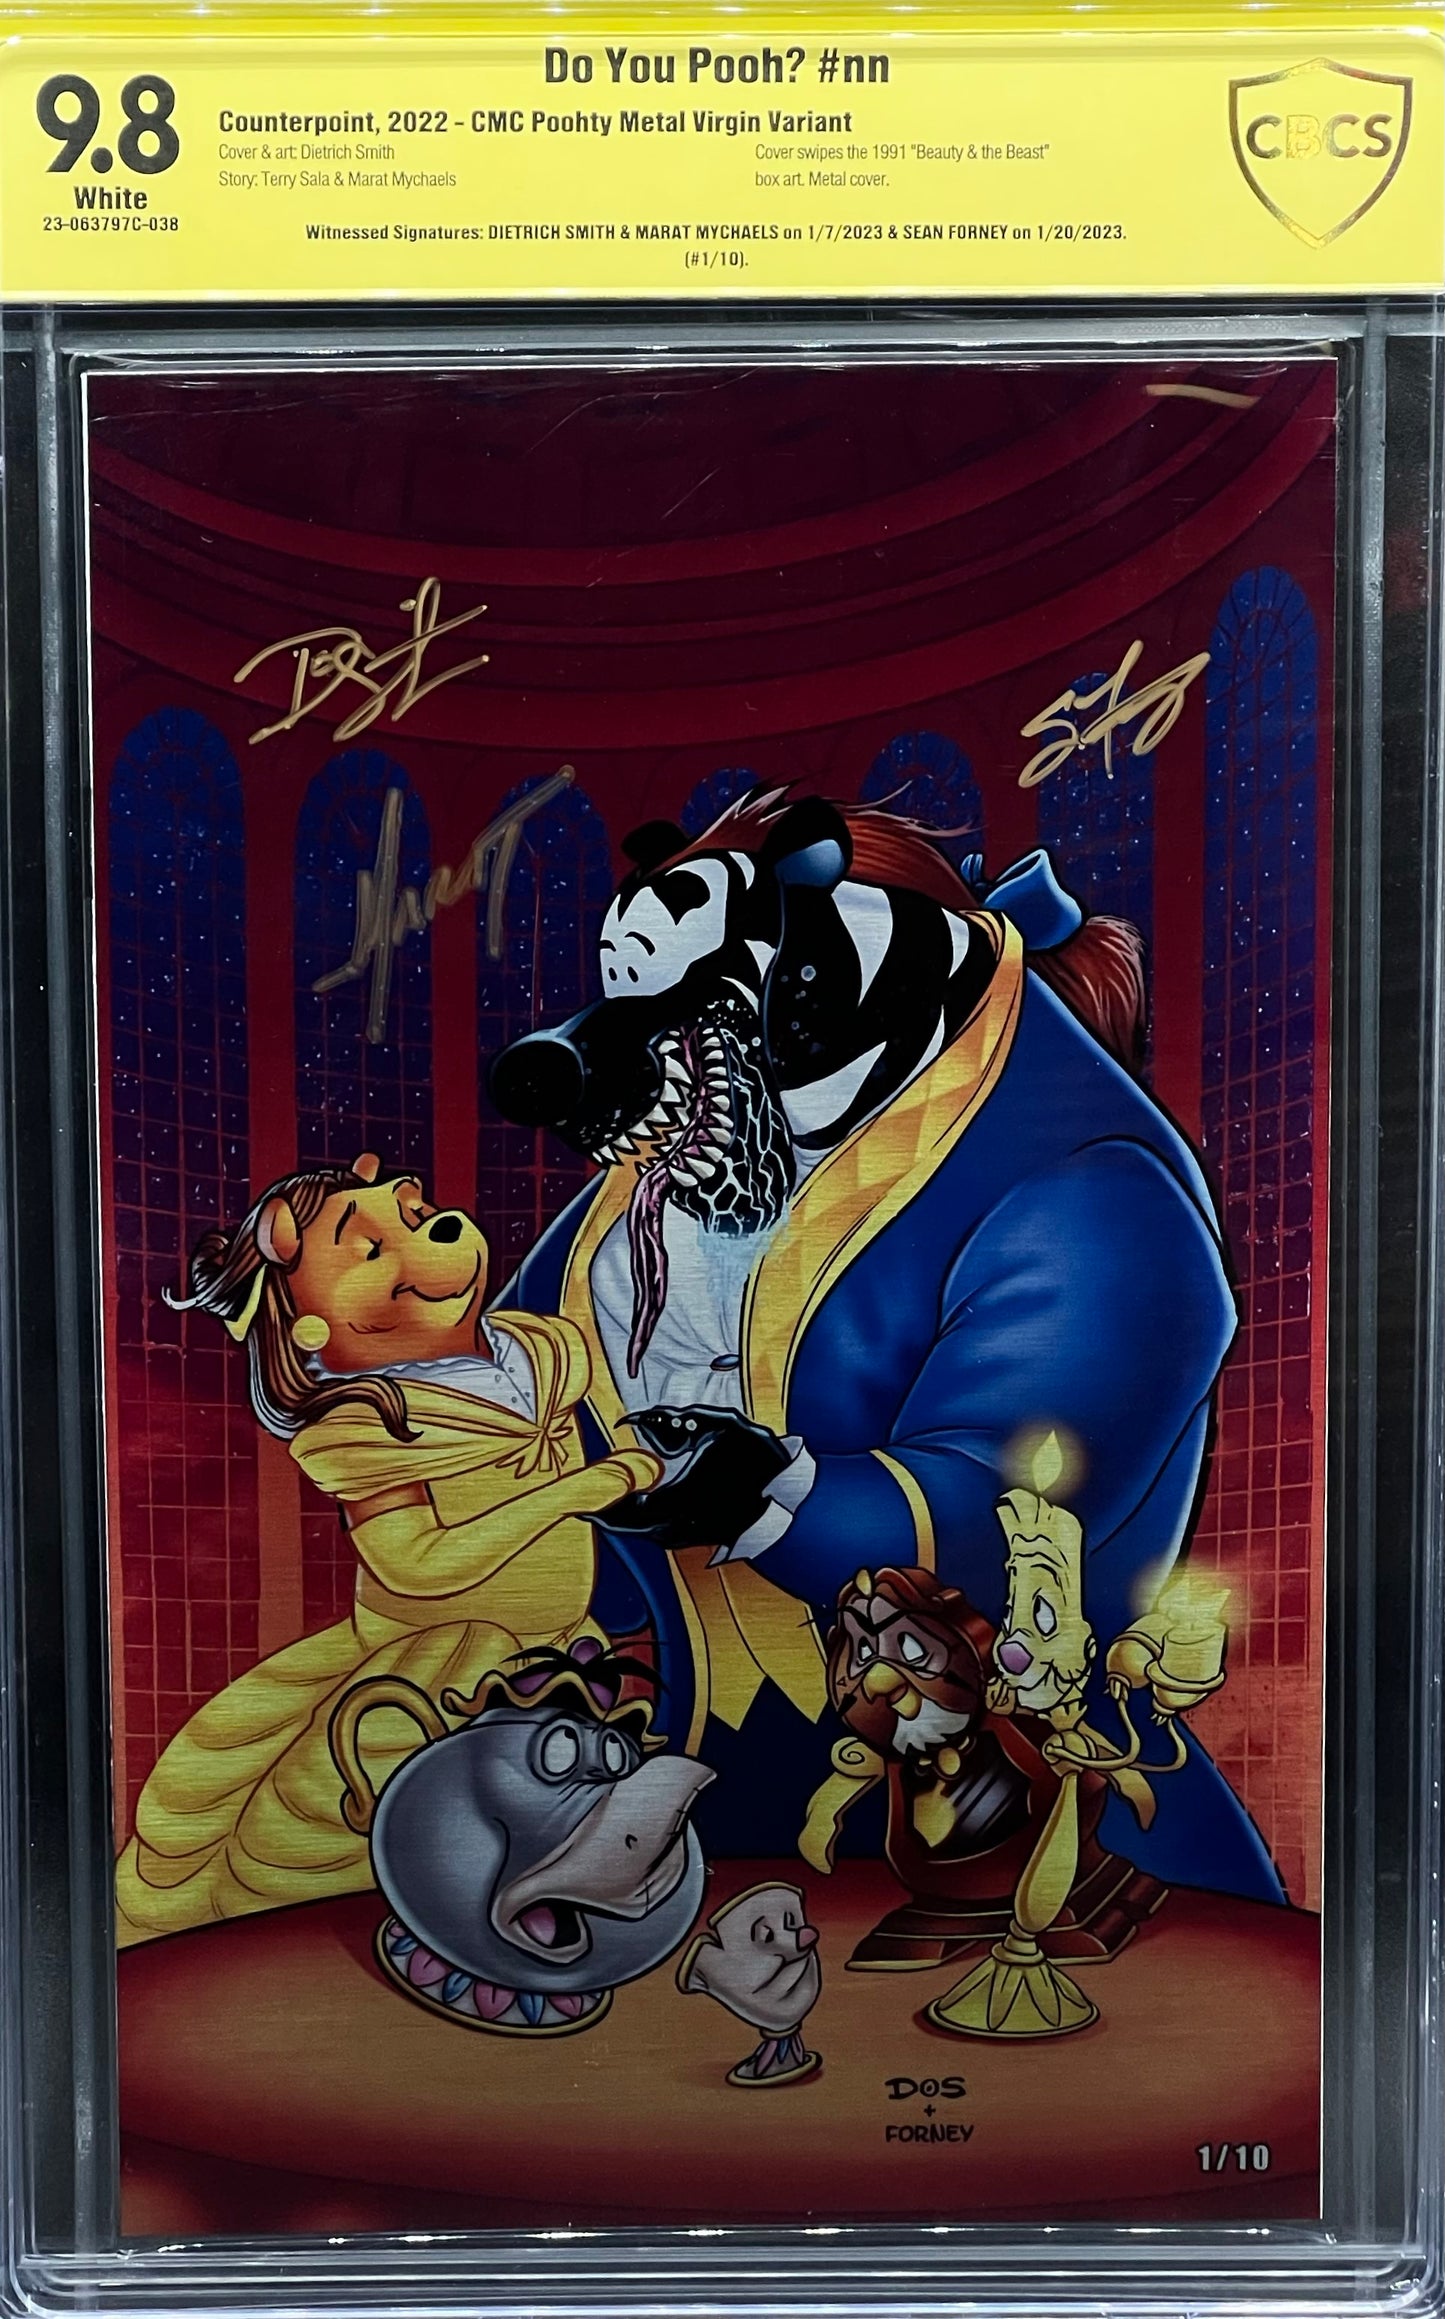 Do You Pooh? #nn CMC Poohty Metal Virgin Variant CBCS 9.8 Yellow Label ~ Triple Signed!